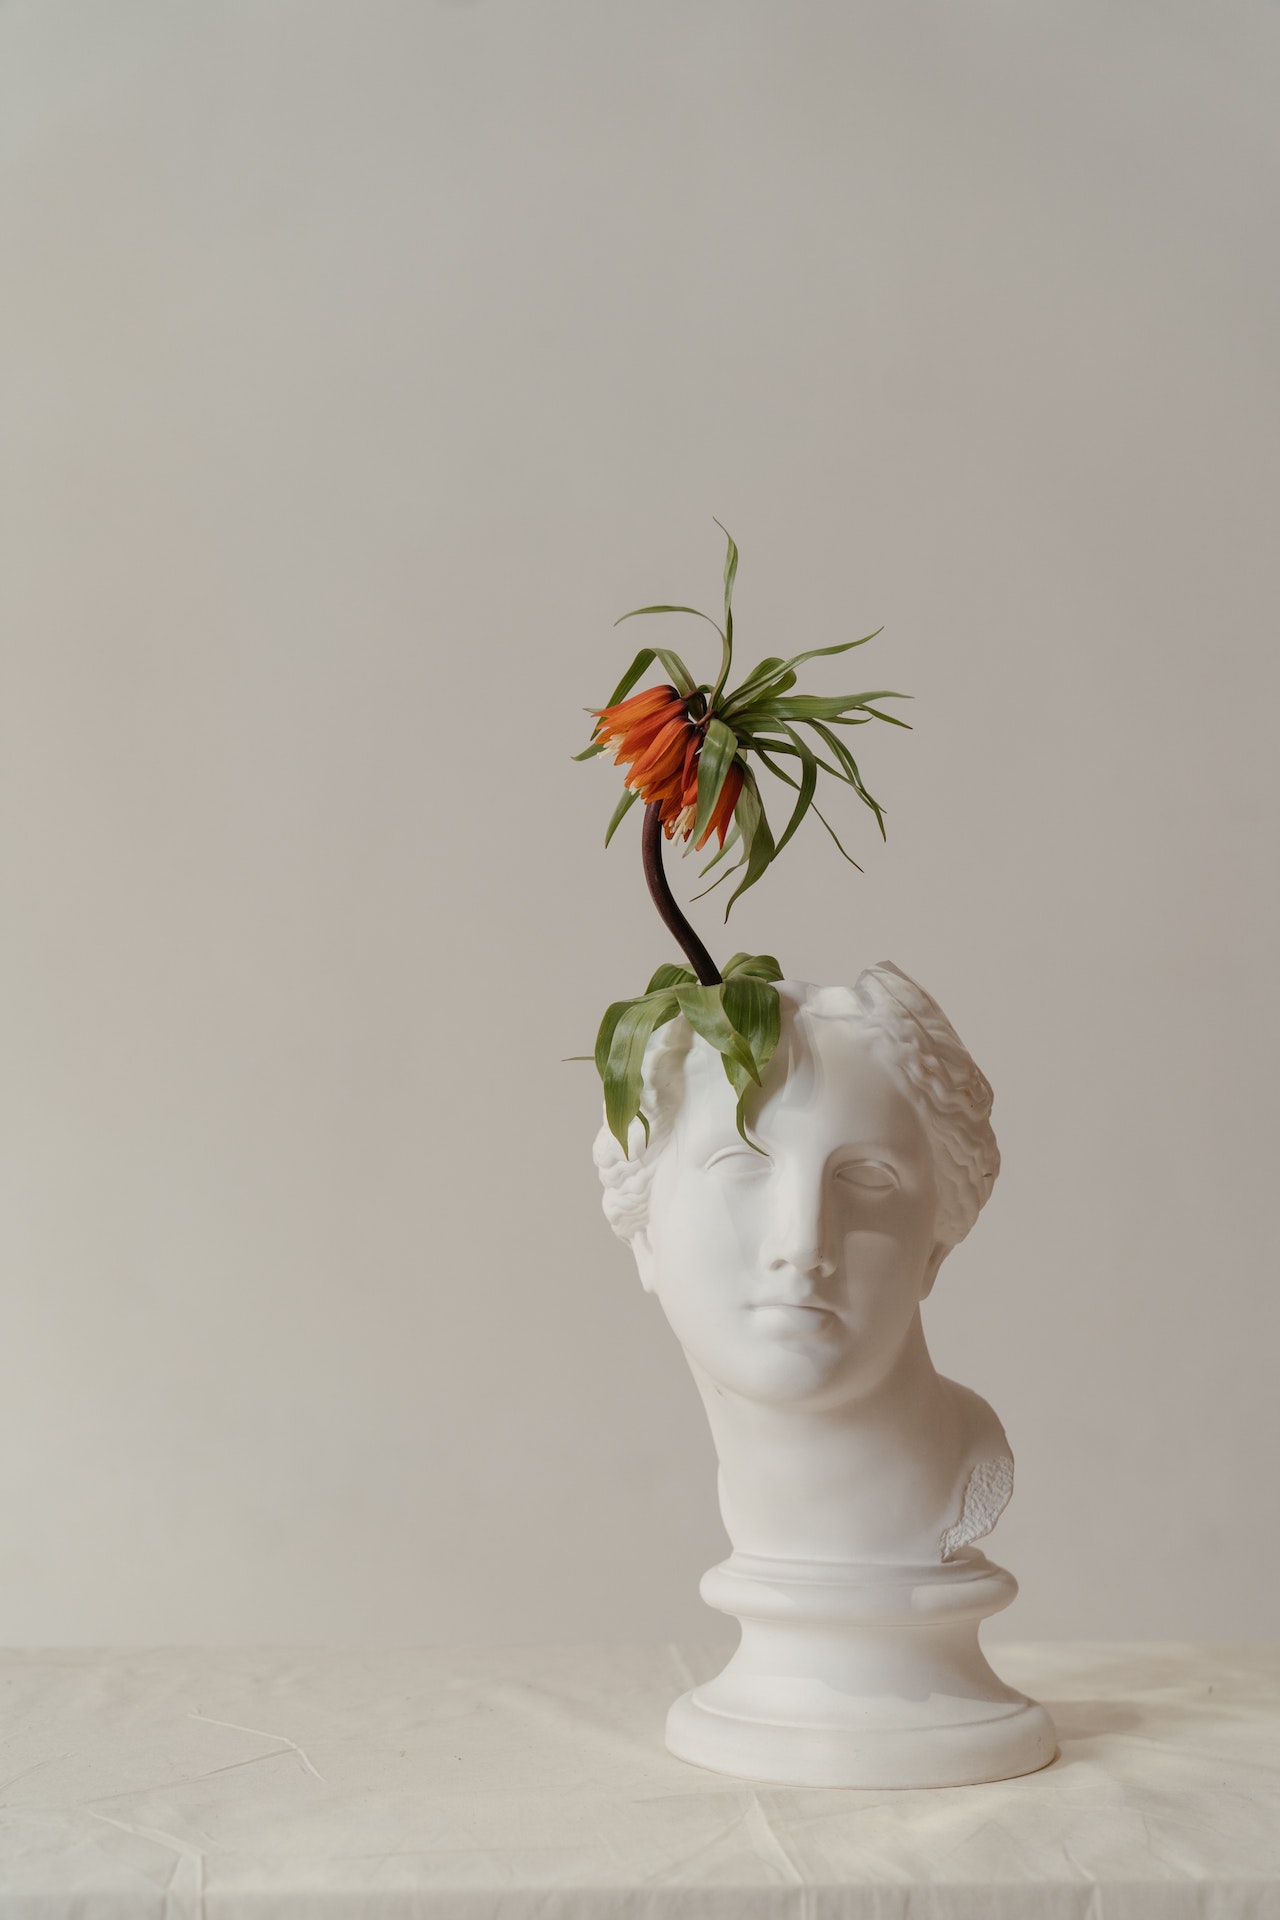 sculpture with a flower on its head